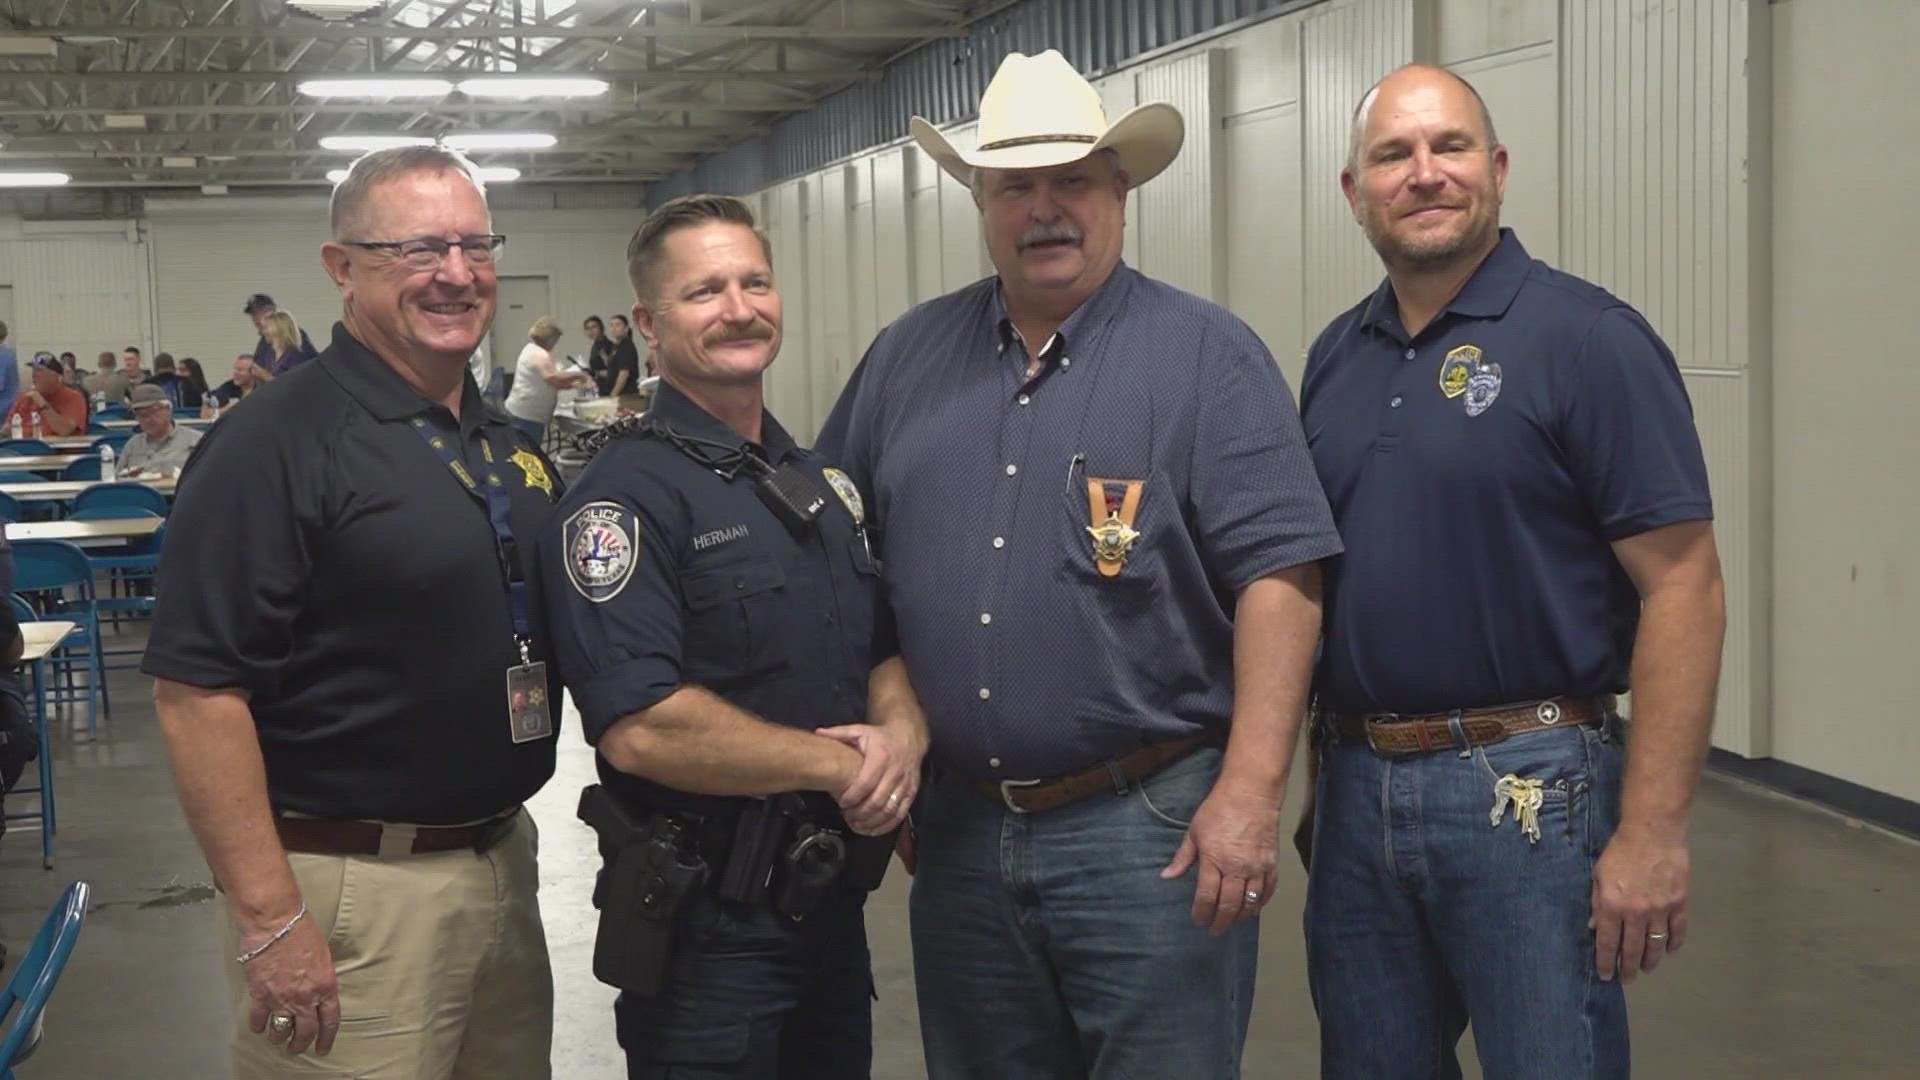 The 'Burgers For Mike' event was on August 18 from 11:00 a.m. to 2:00 p.m. at the Ector County Coliseum.